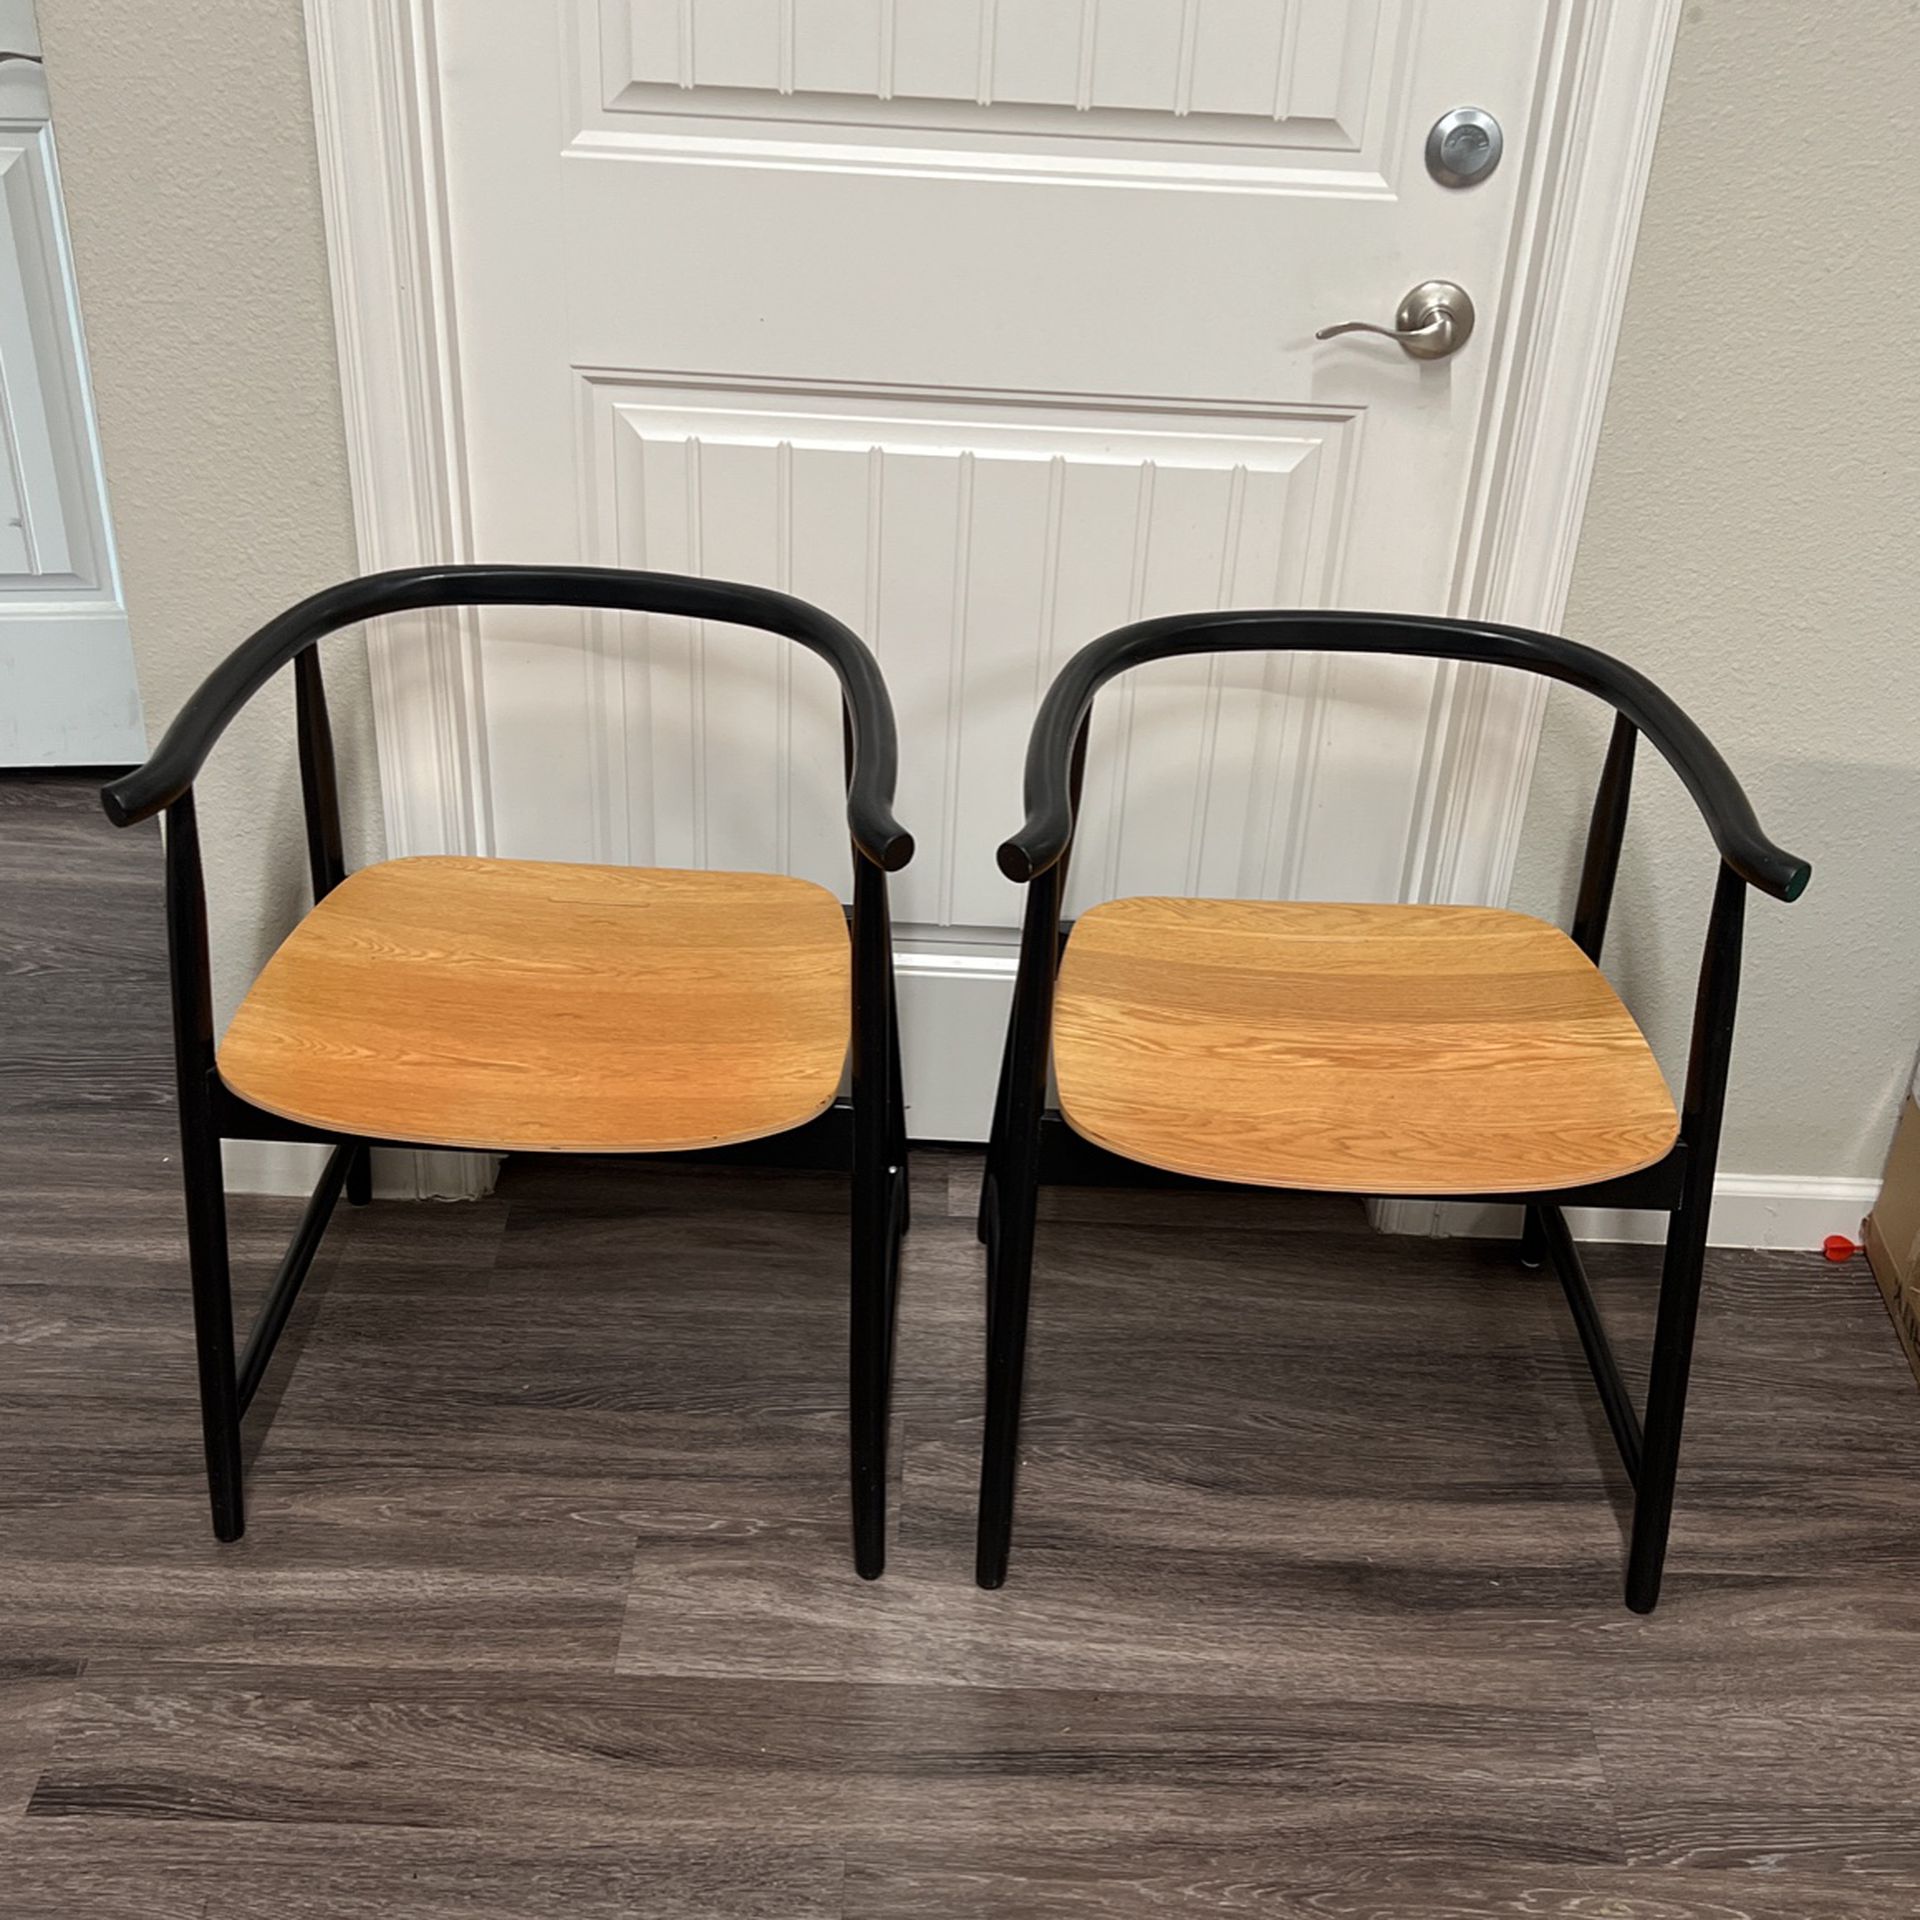 USED IKEA Wooden Wishbone Dining Chairs (2) 2013 Collection 